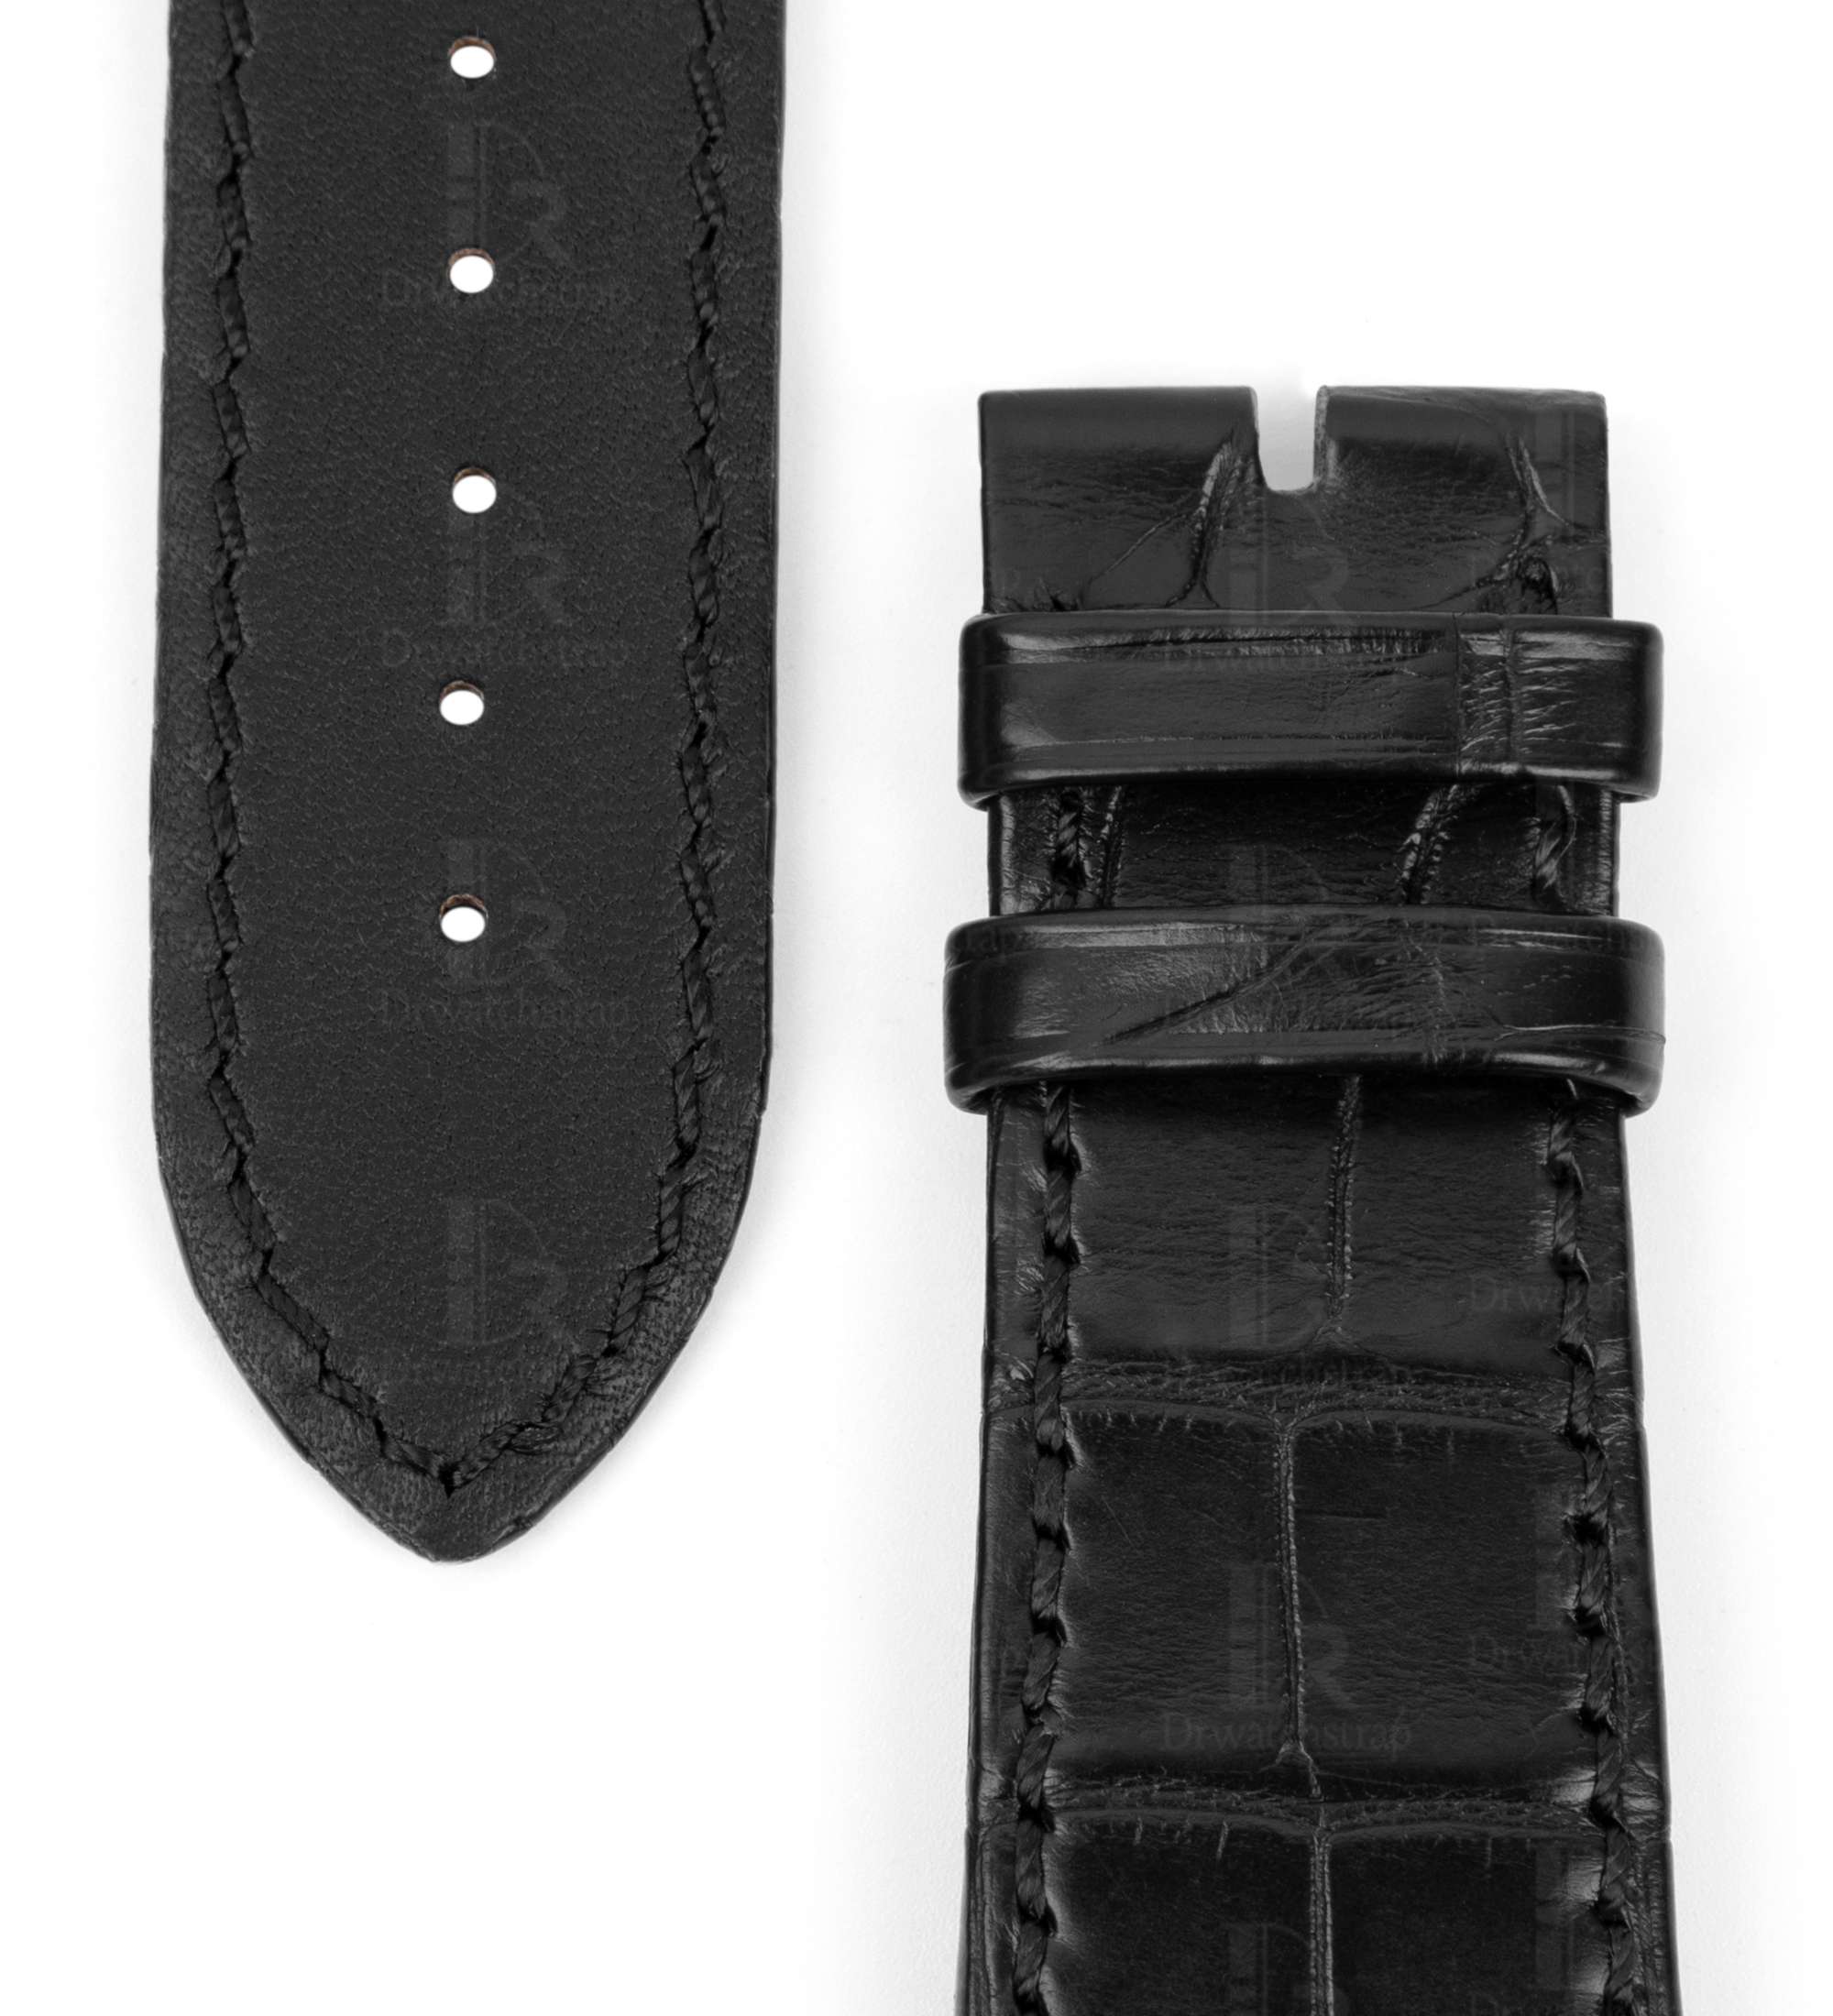 Vacheron Constantin Overseas Leather Strap replacement for sale Custom handmade Black American Alligator watch bands wholesale and retail